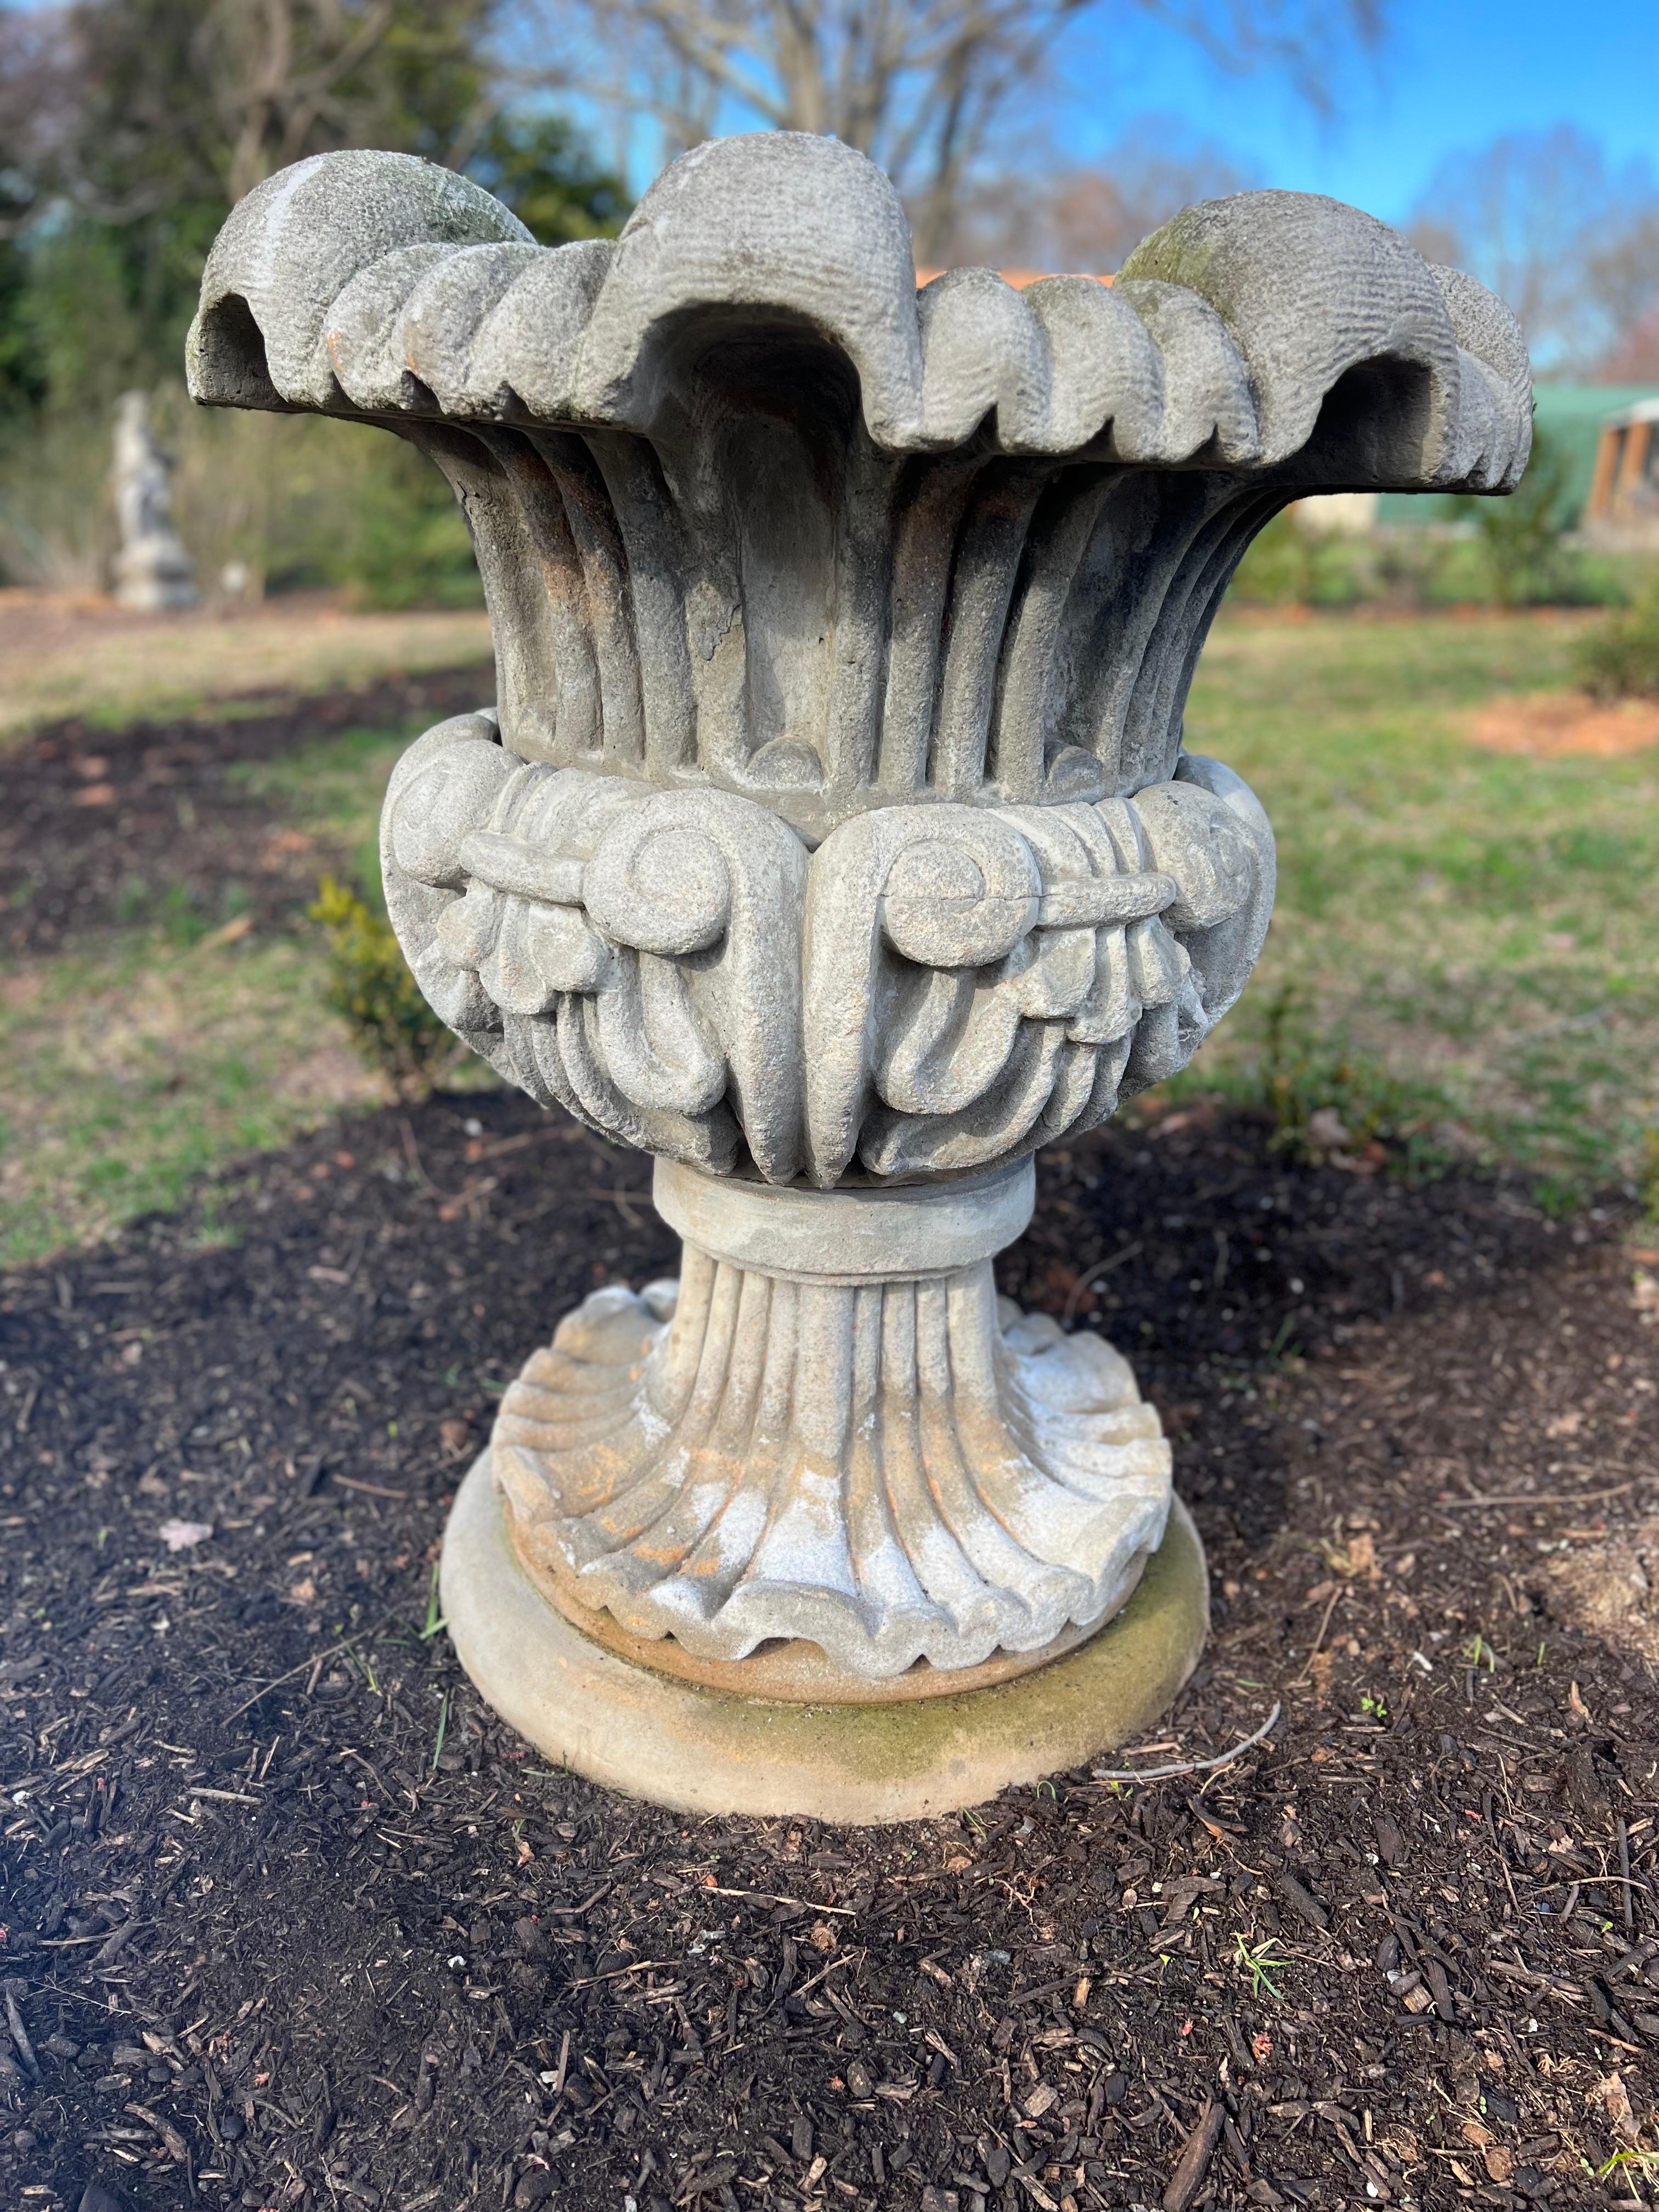 Please be sure to note the size. Very large scale garden planter / urn. 
Stands 42 inches high.  
Ornate detail comes in three sections. 

Tulip shape top crown. Overall great condition with signs of age / patina. See pics. 

